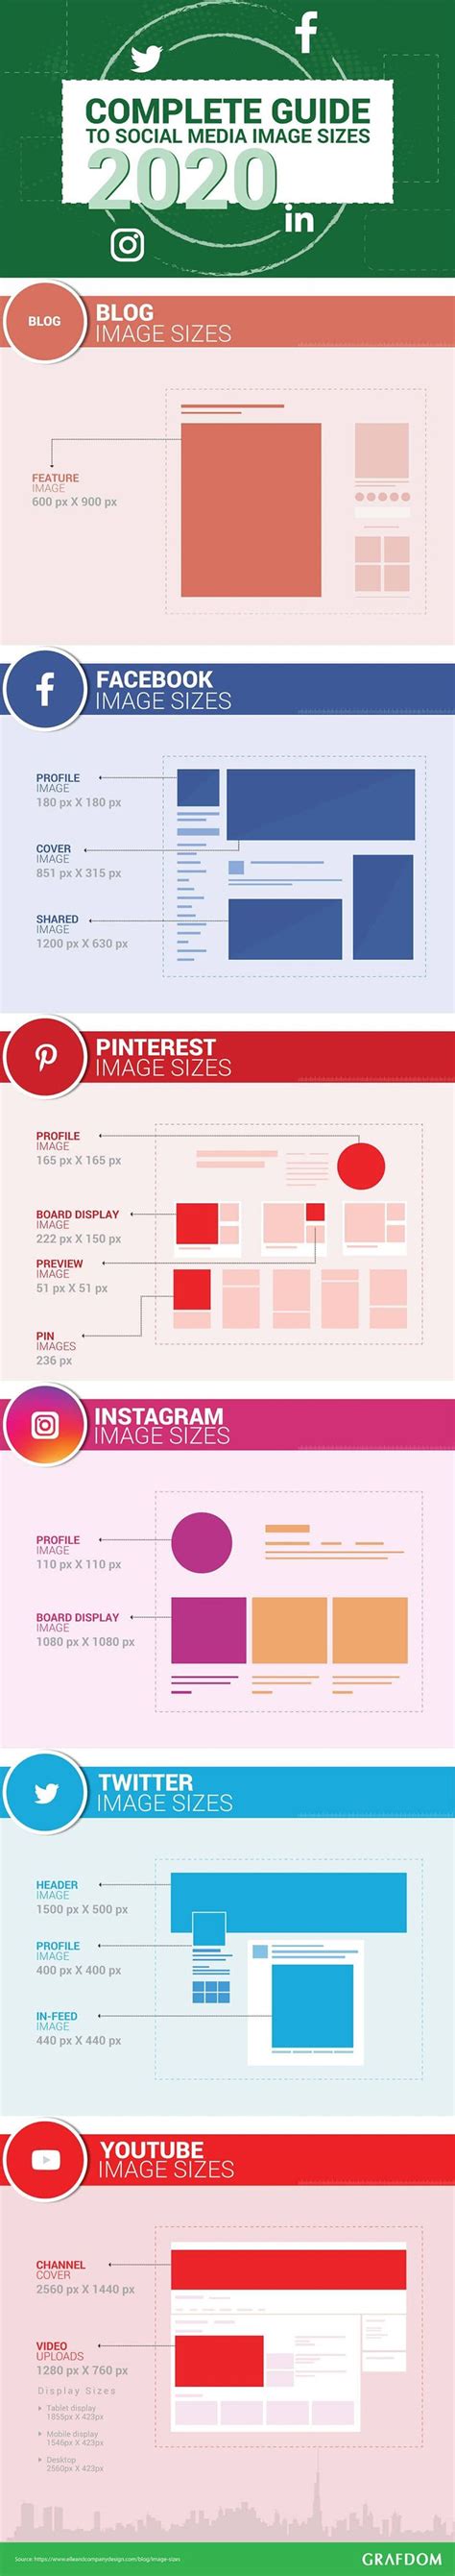 A Beginners Guide To Social Media Image Sizes For 2020 Infographic